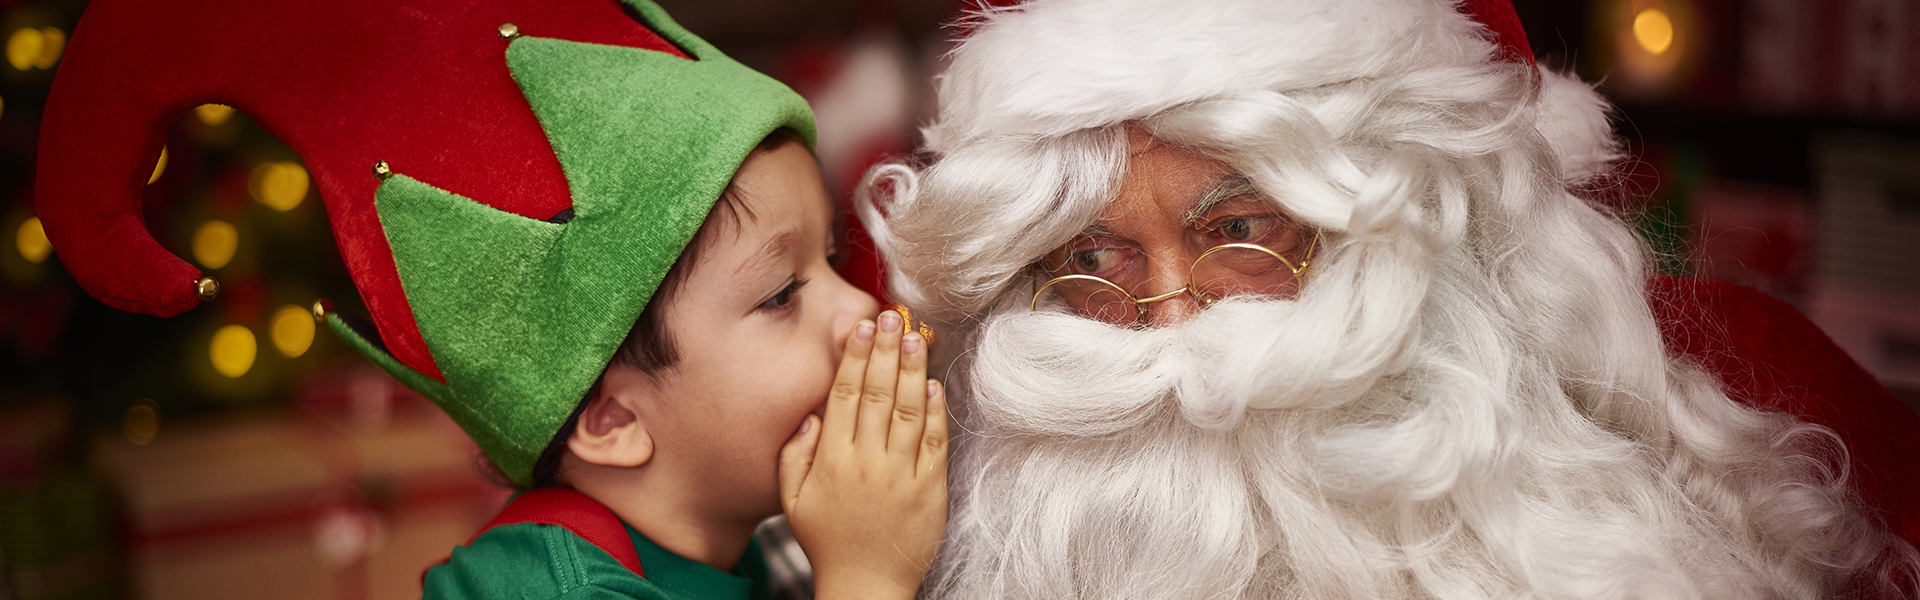 Indicating that email marketing sends the right message at the right time, a cute little boy dressed as elf sits on Santa’s lap and whispers his Christmas gift wish into Santa’s ear.